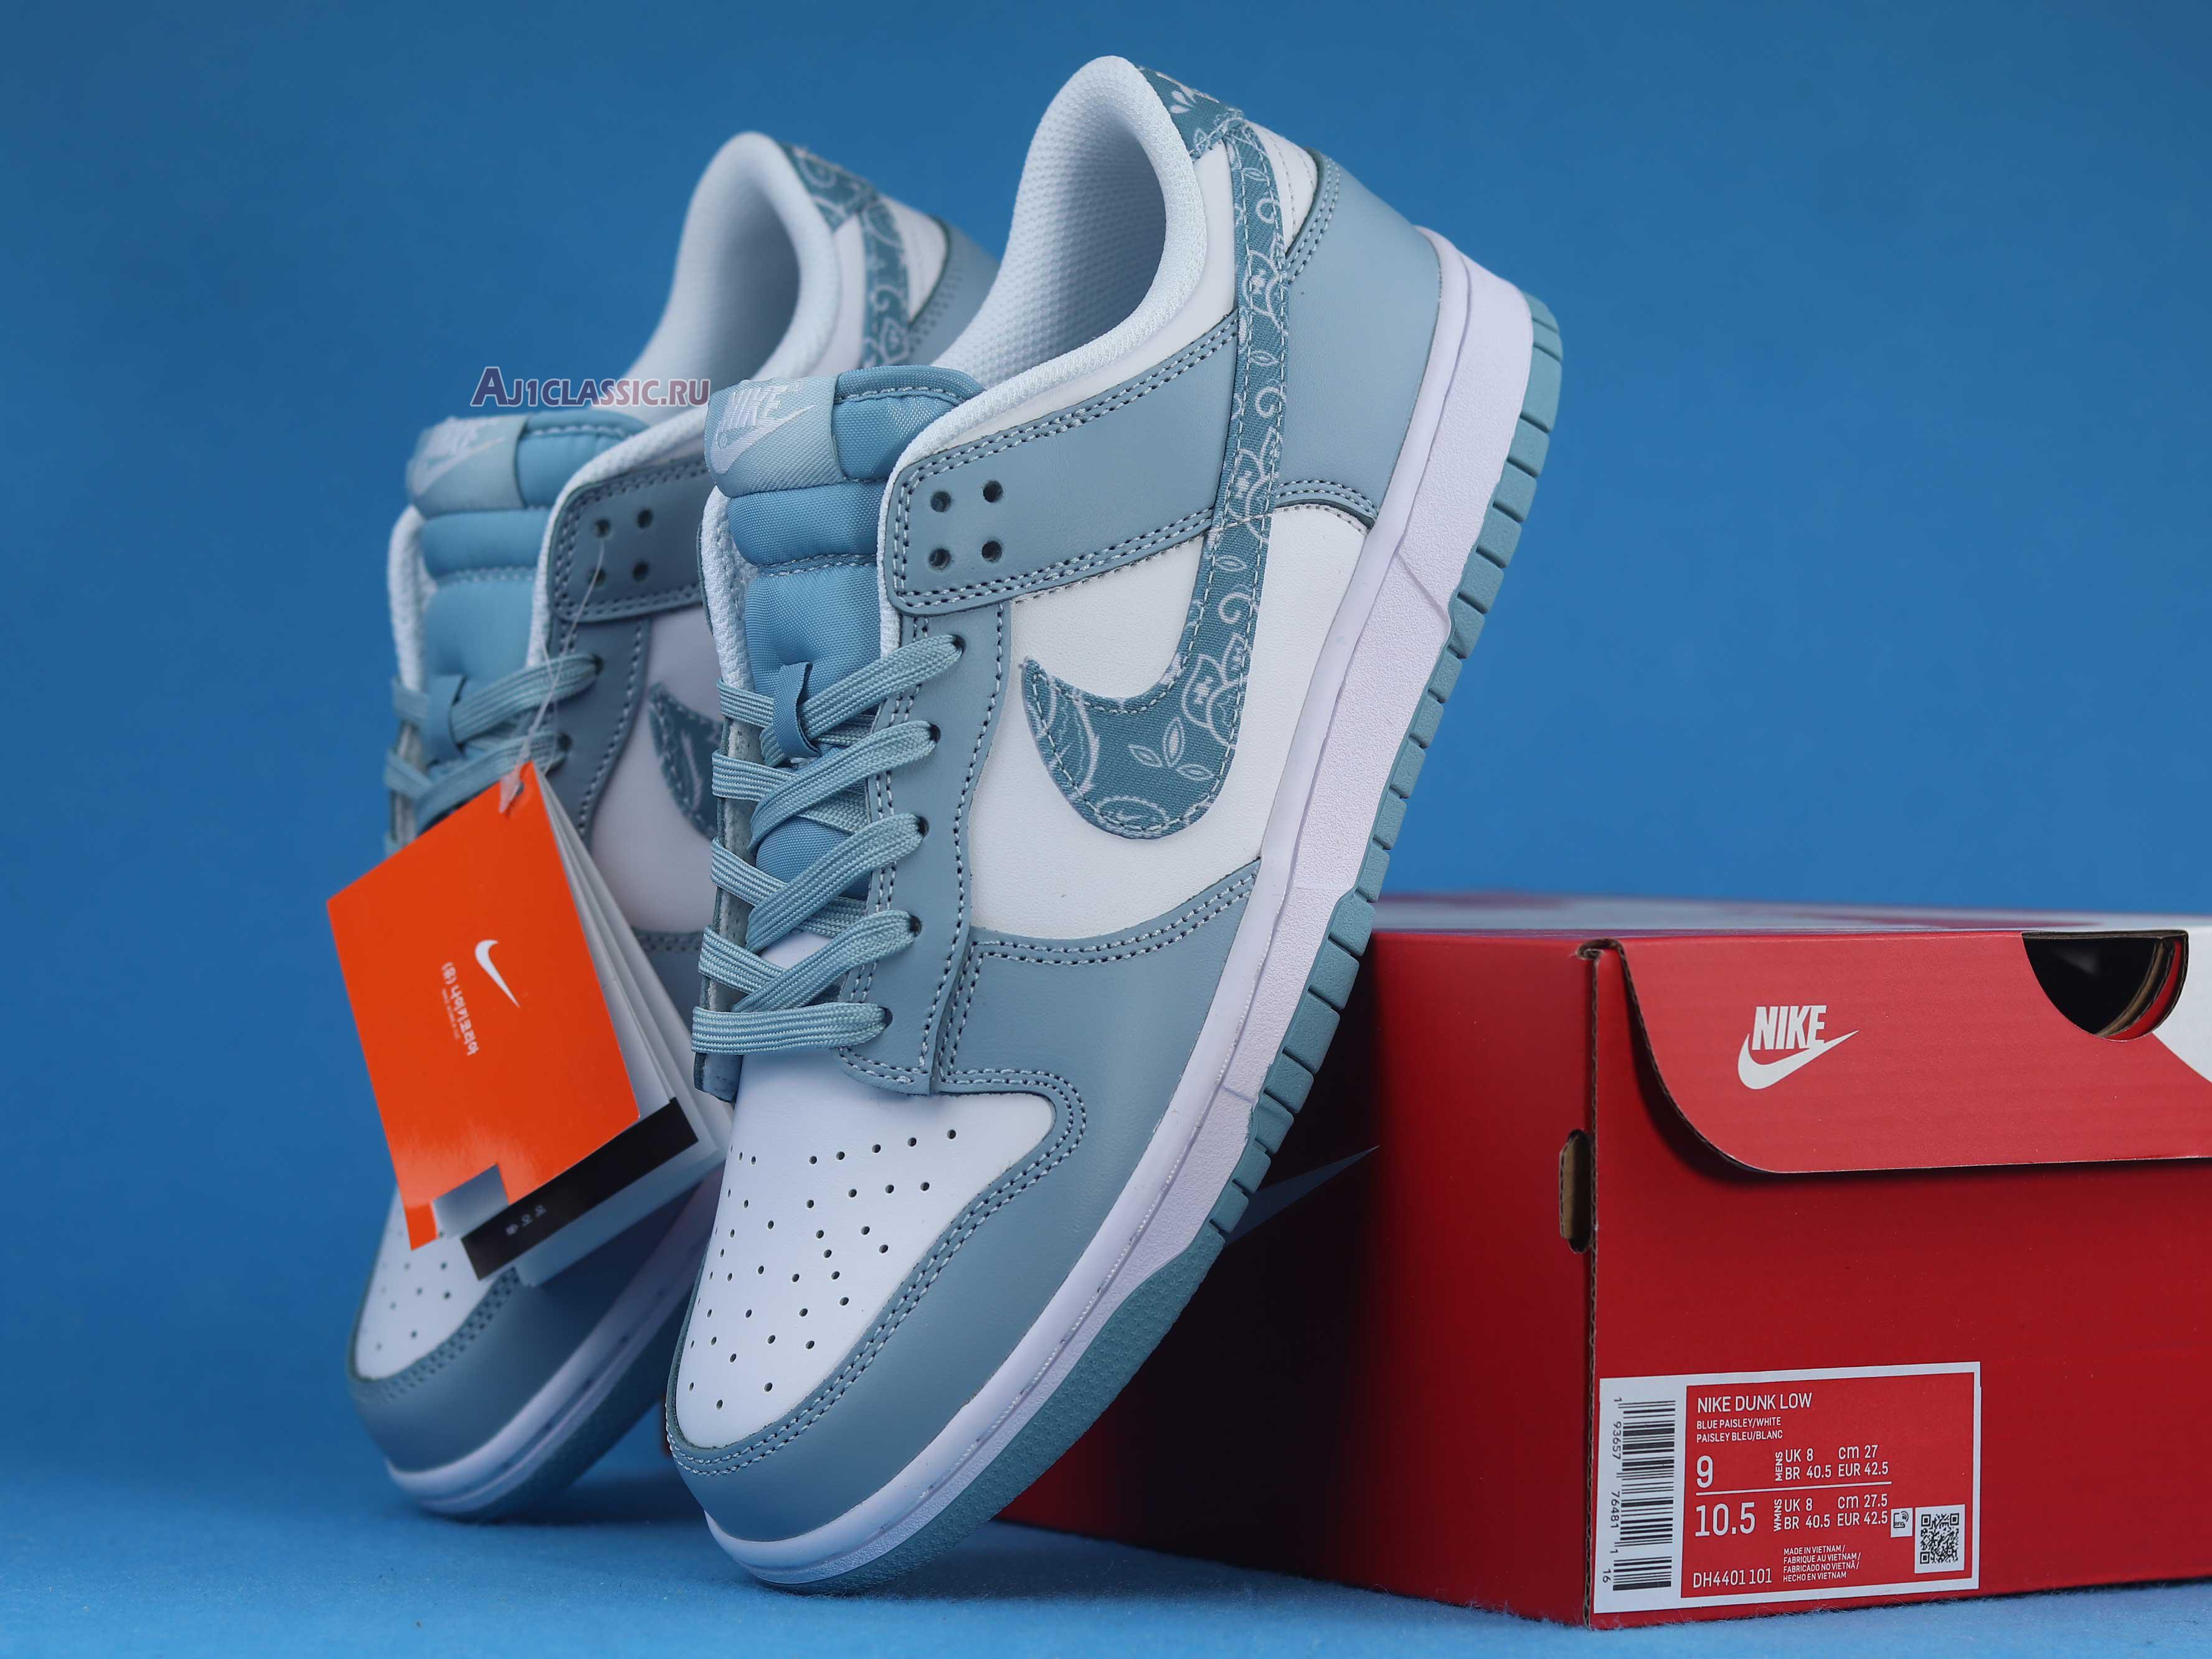 Nike Dunk Low Blue Paisley DH4401-101 Sky Blue/White Sneakers